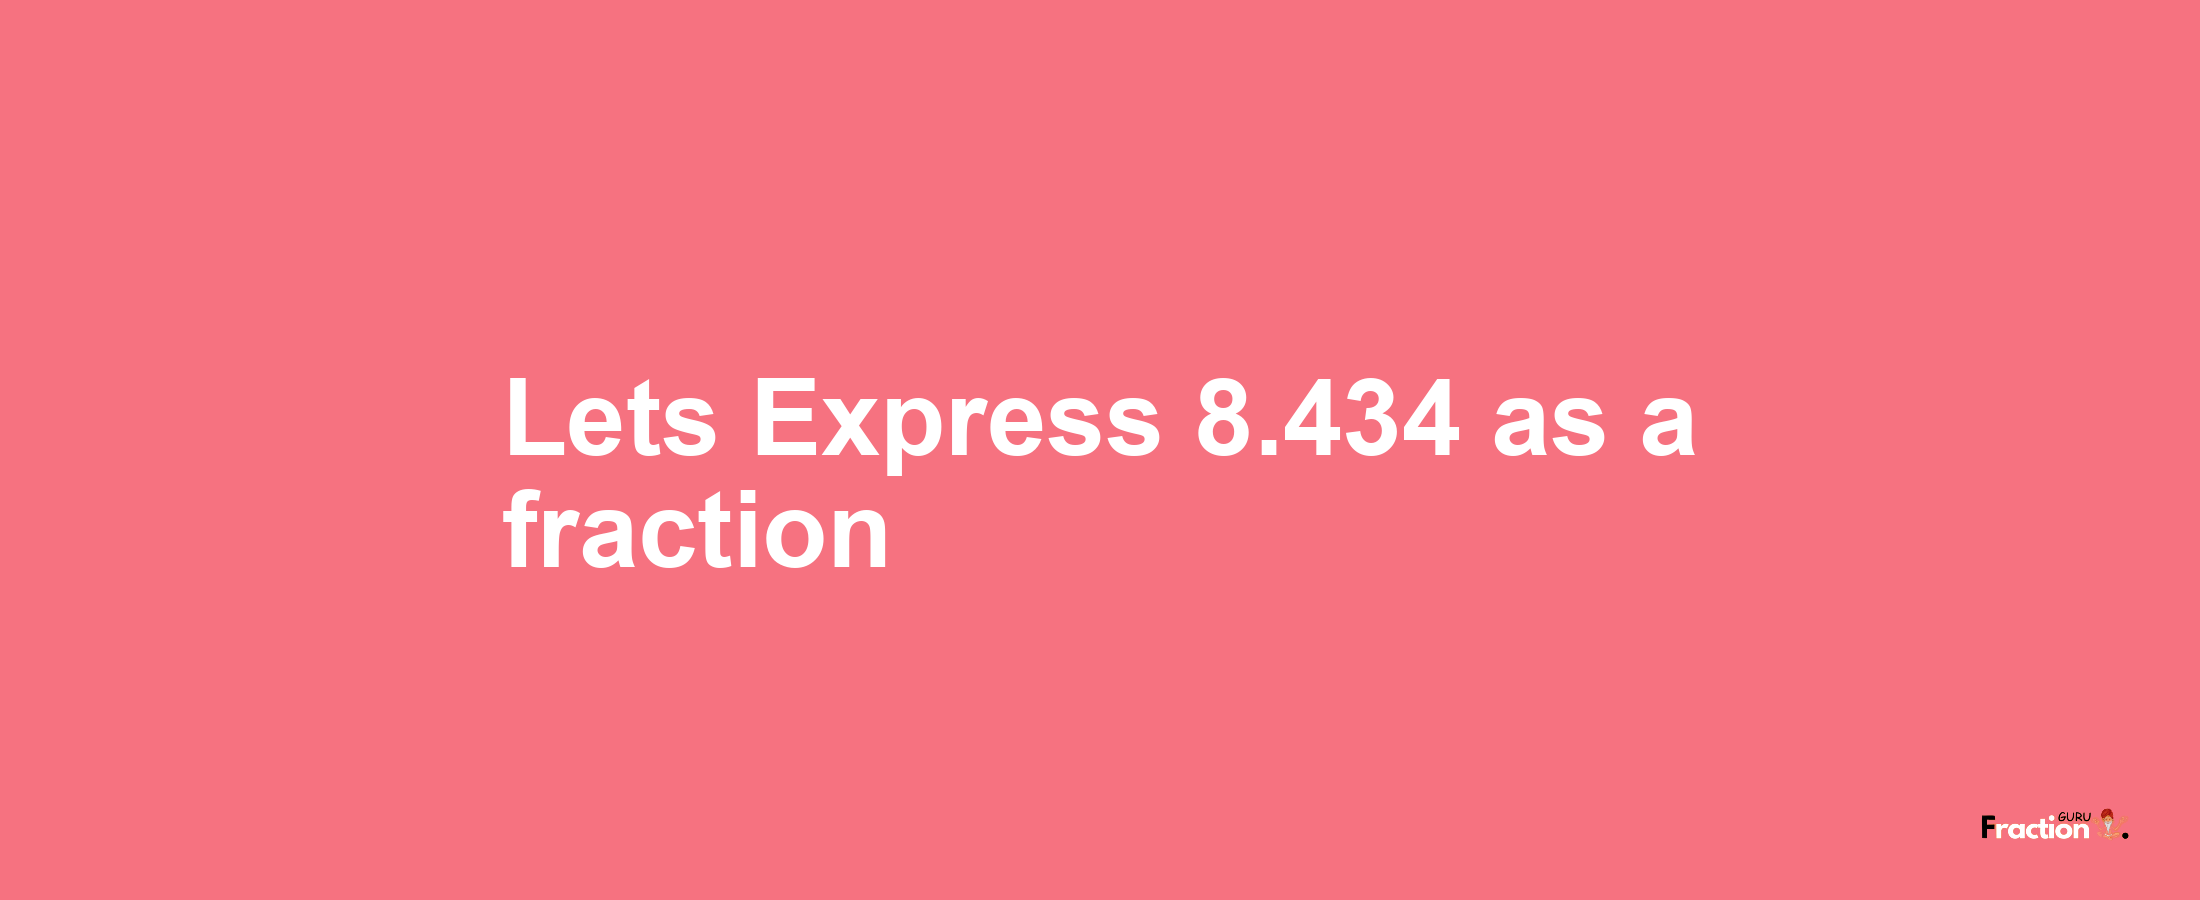 Lets Express 8.434 as afraction